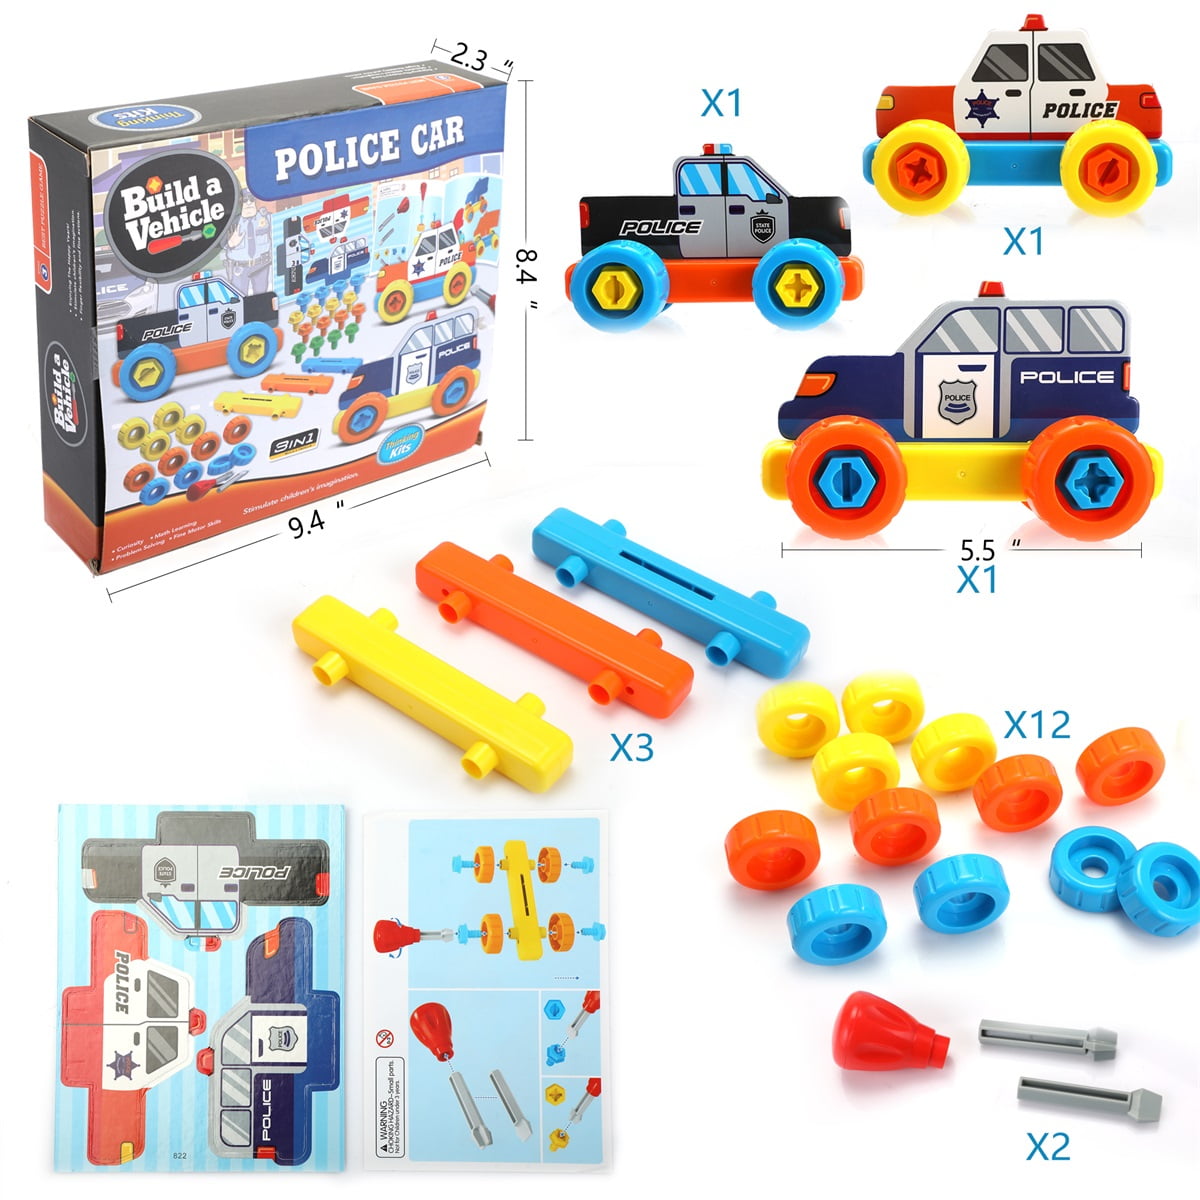 Canddidliike Police Series Toy Building Play Set STEM Learning for Kids Toddlers Aged 2 and Up, Gifts for Boys Girls